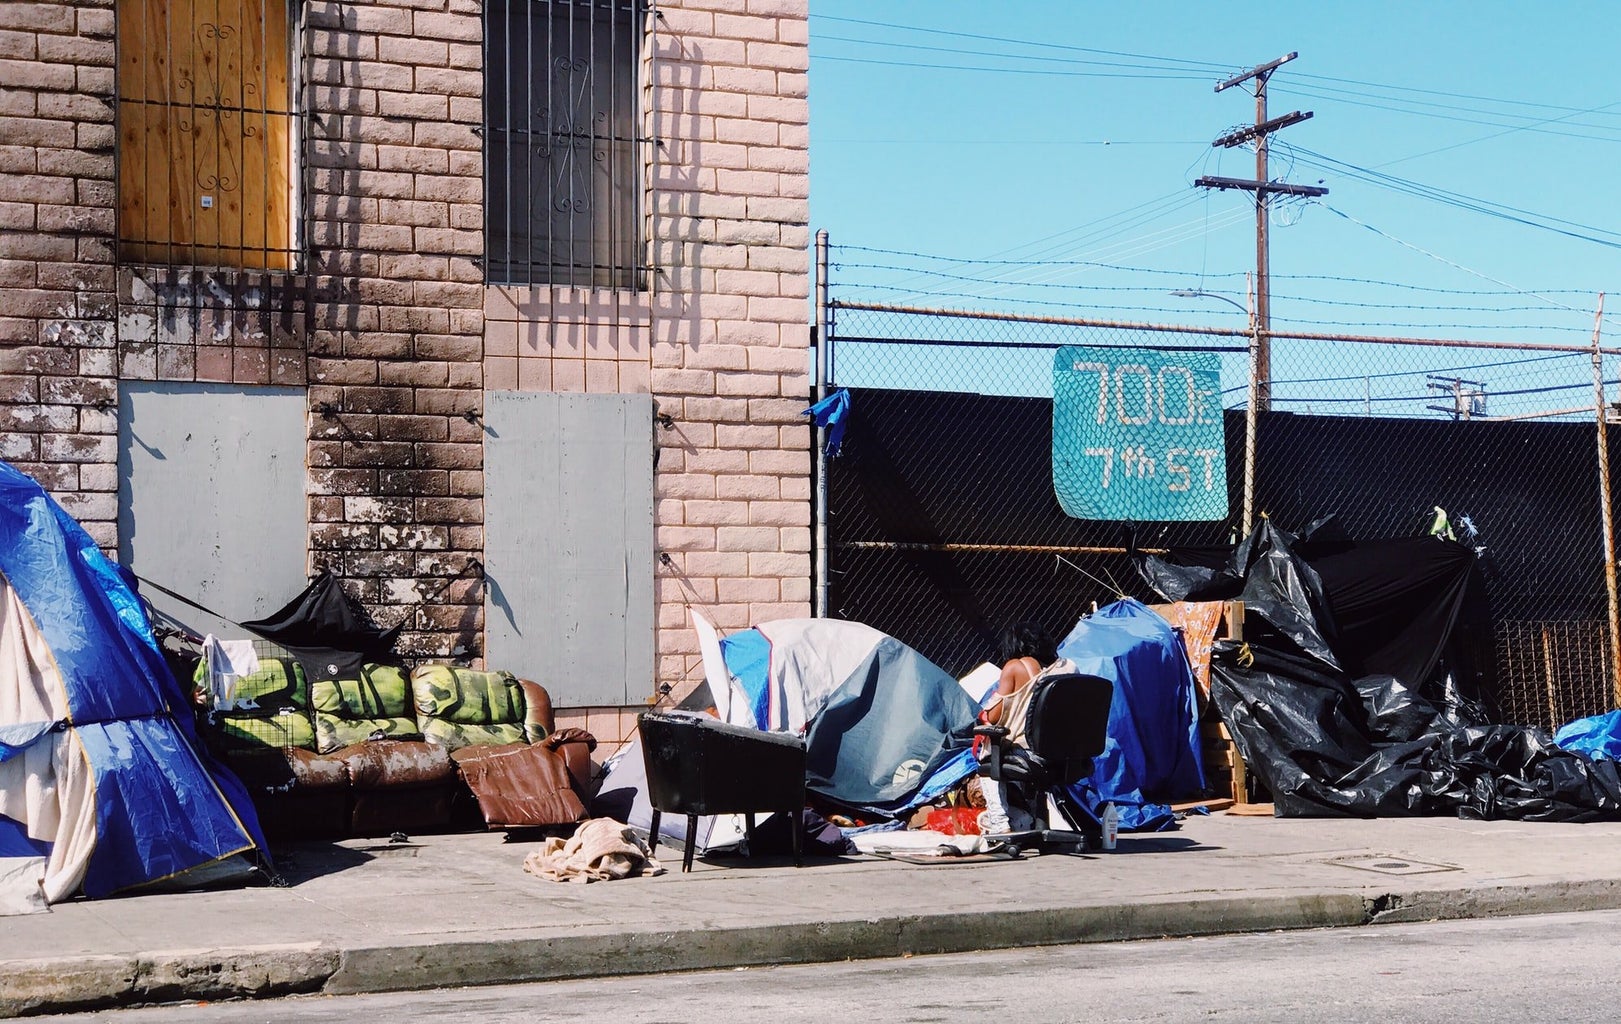 Homeless blue tents